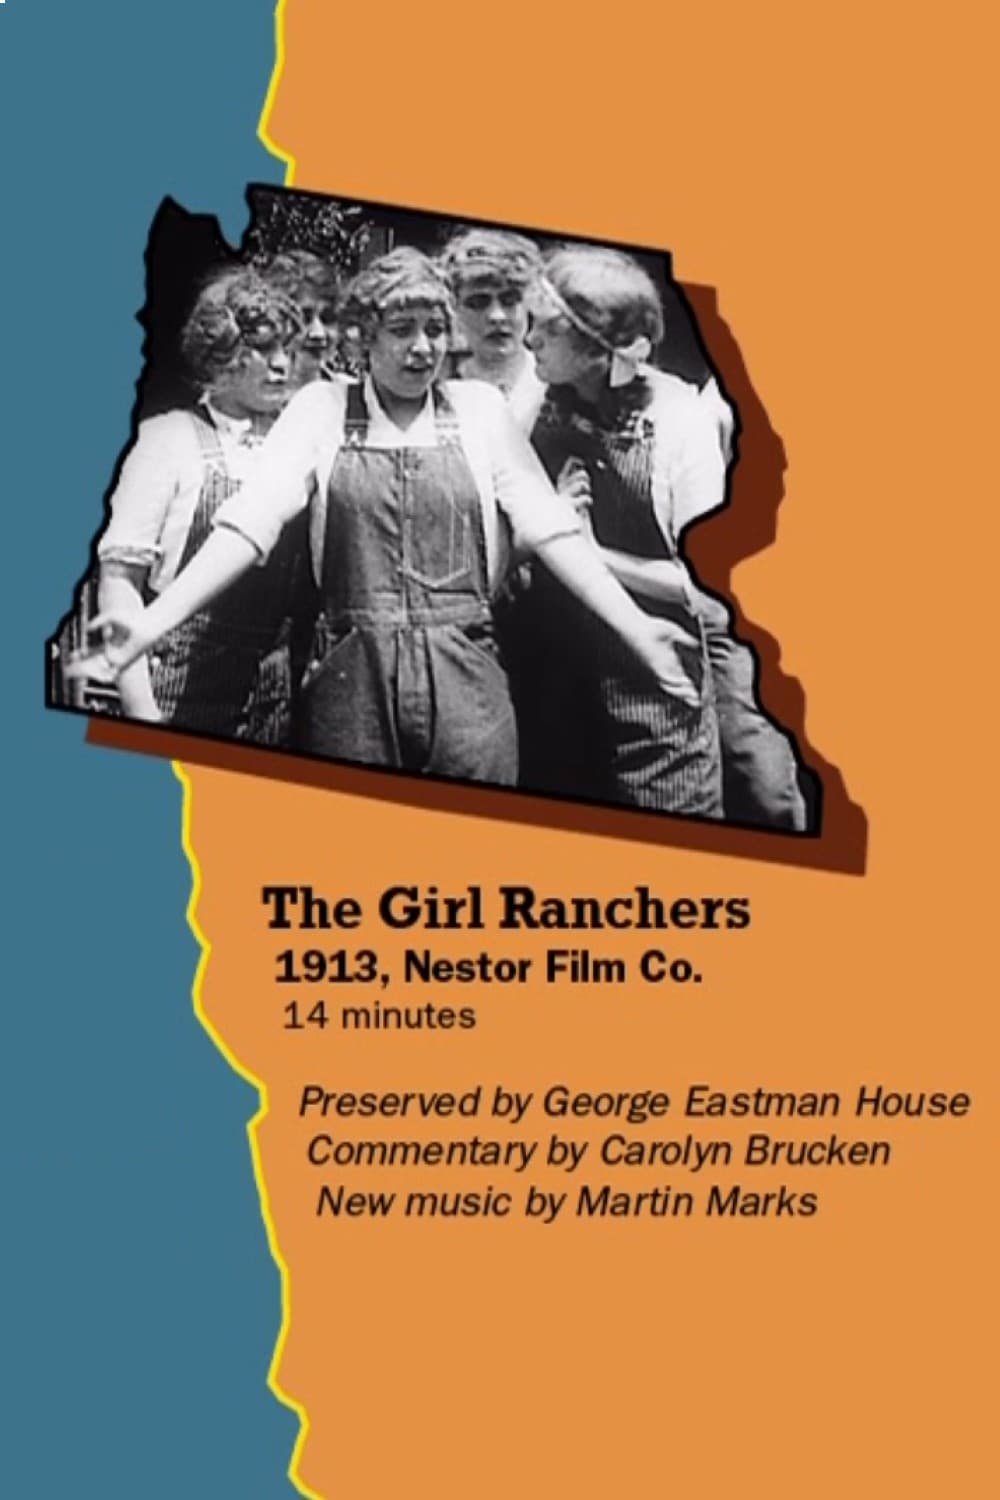 The Girl Ranchers